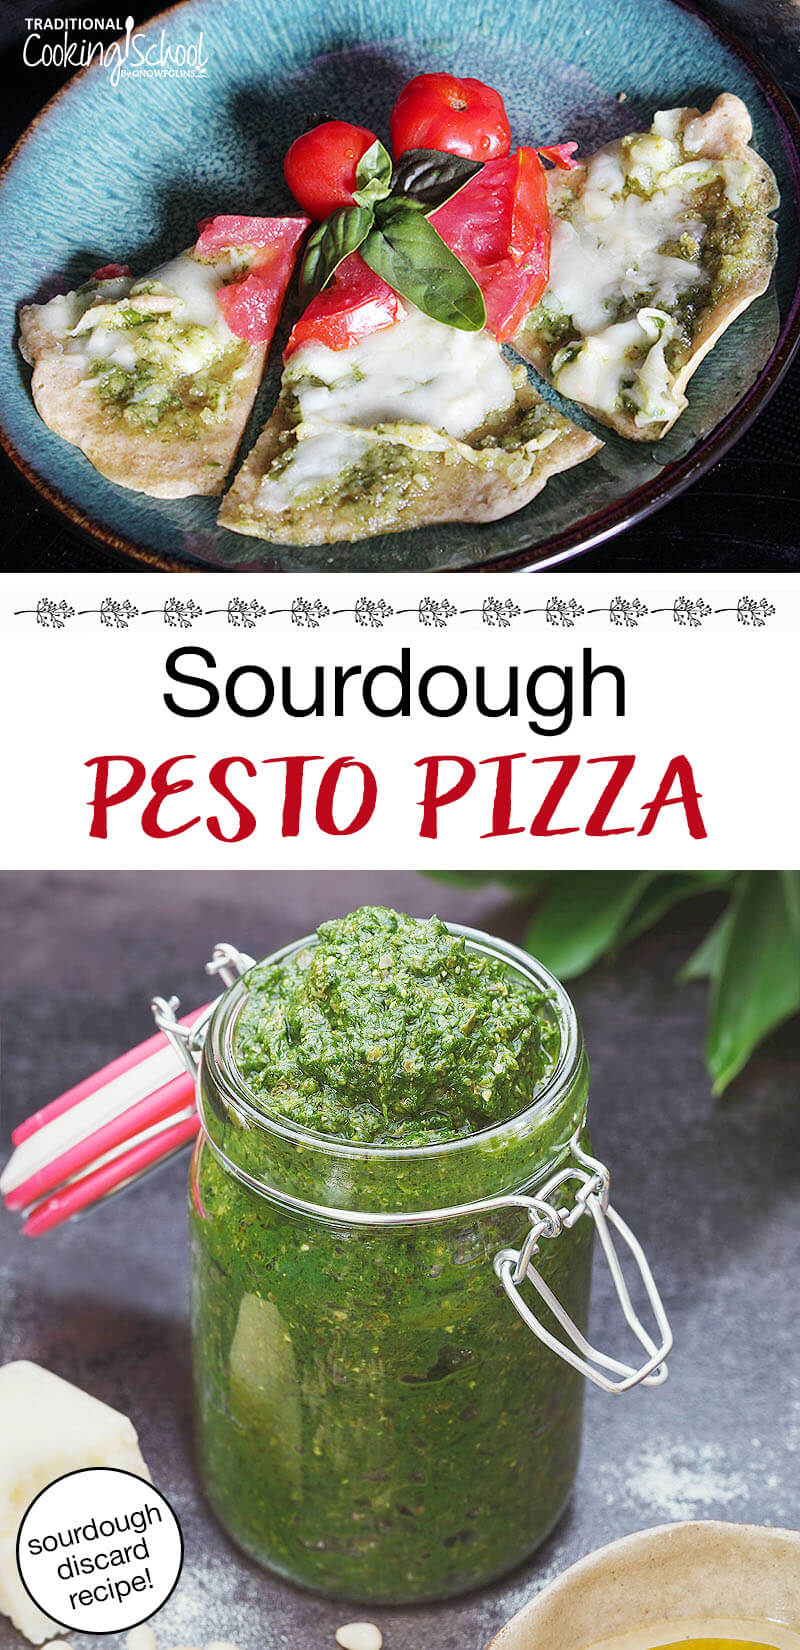 photo collage of pesto and cheesy, herbed pizza on a plate. Text overlay says: "Sourdough Pesto Pizza (sourdough discard recipe!)"